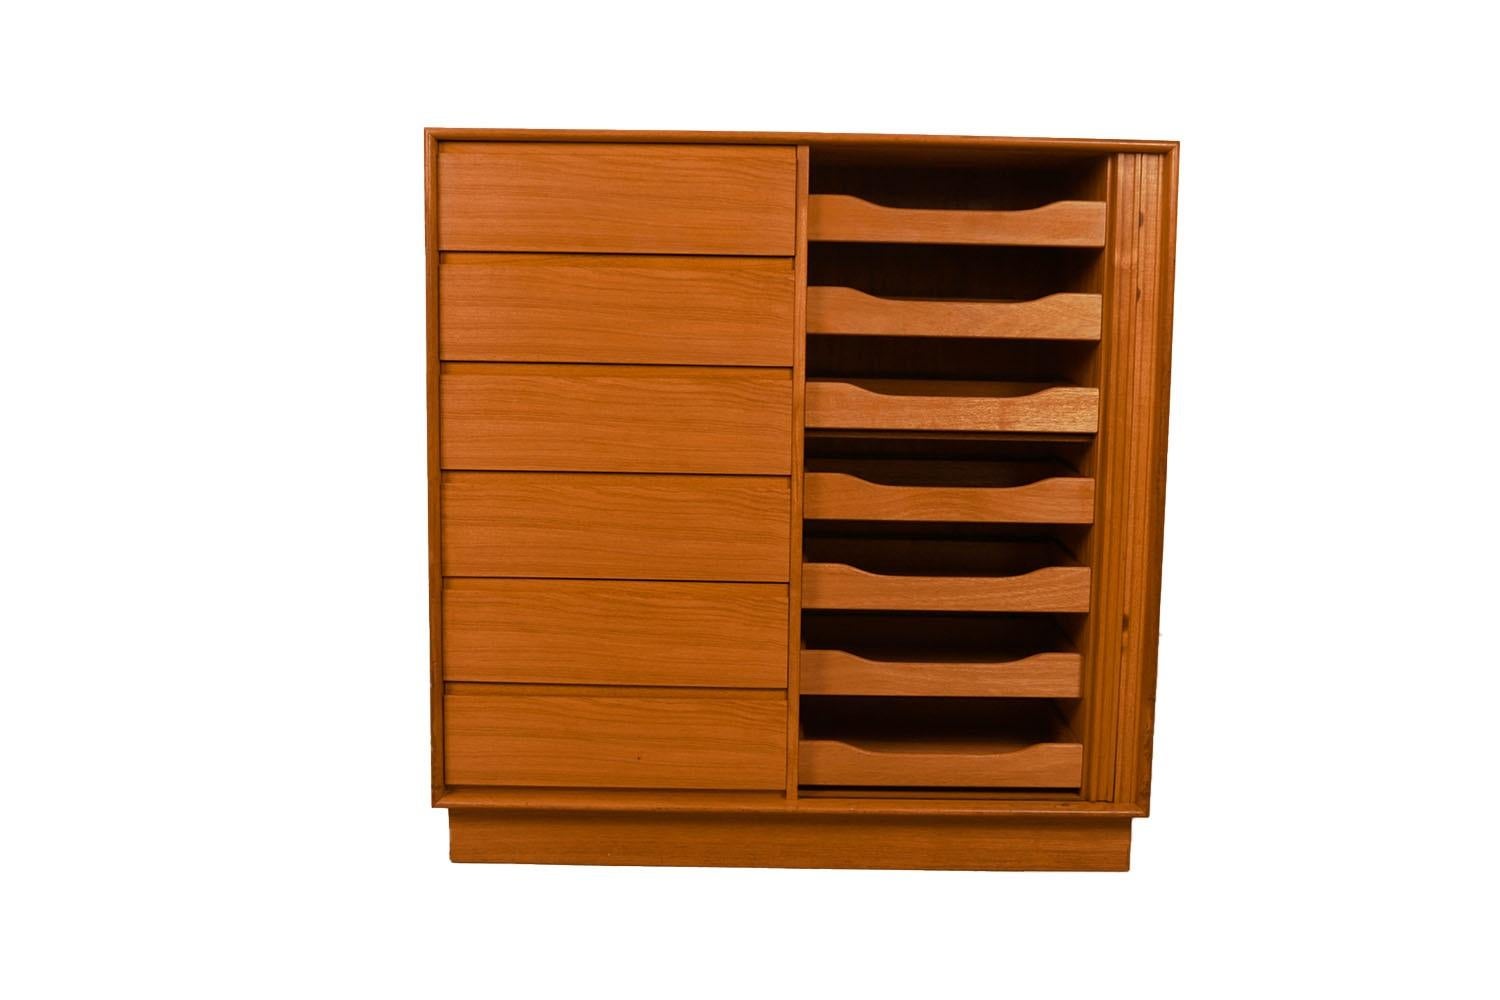 Beautiful mid-century modern highboy, gentleman’s tall tambour dresser, wardrobe, circa 1970’s, by Danflex made in Denmark. Don’t be fooled by the term “Gentleman’s Chest” – this high functioning storage piece is really gender neutral, with plenty